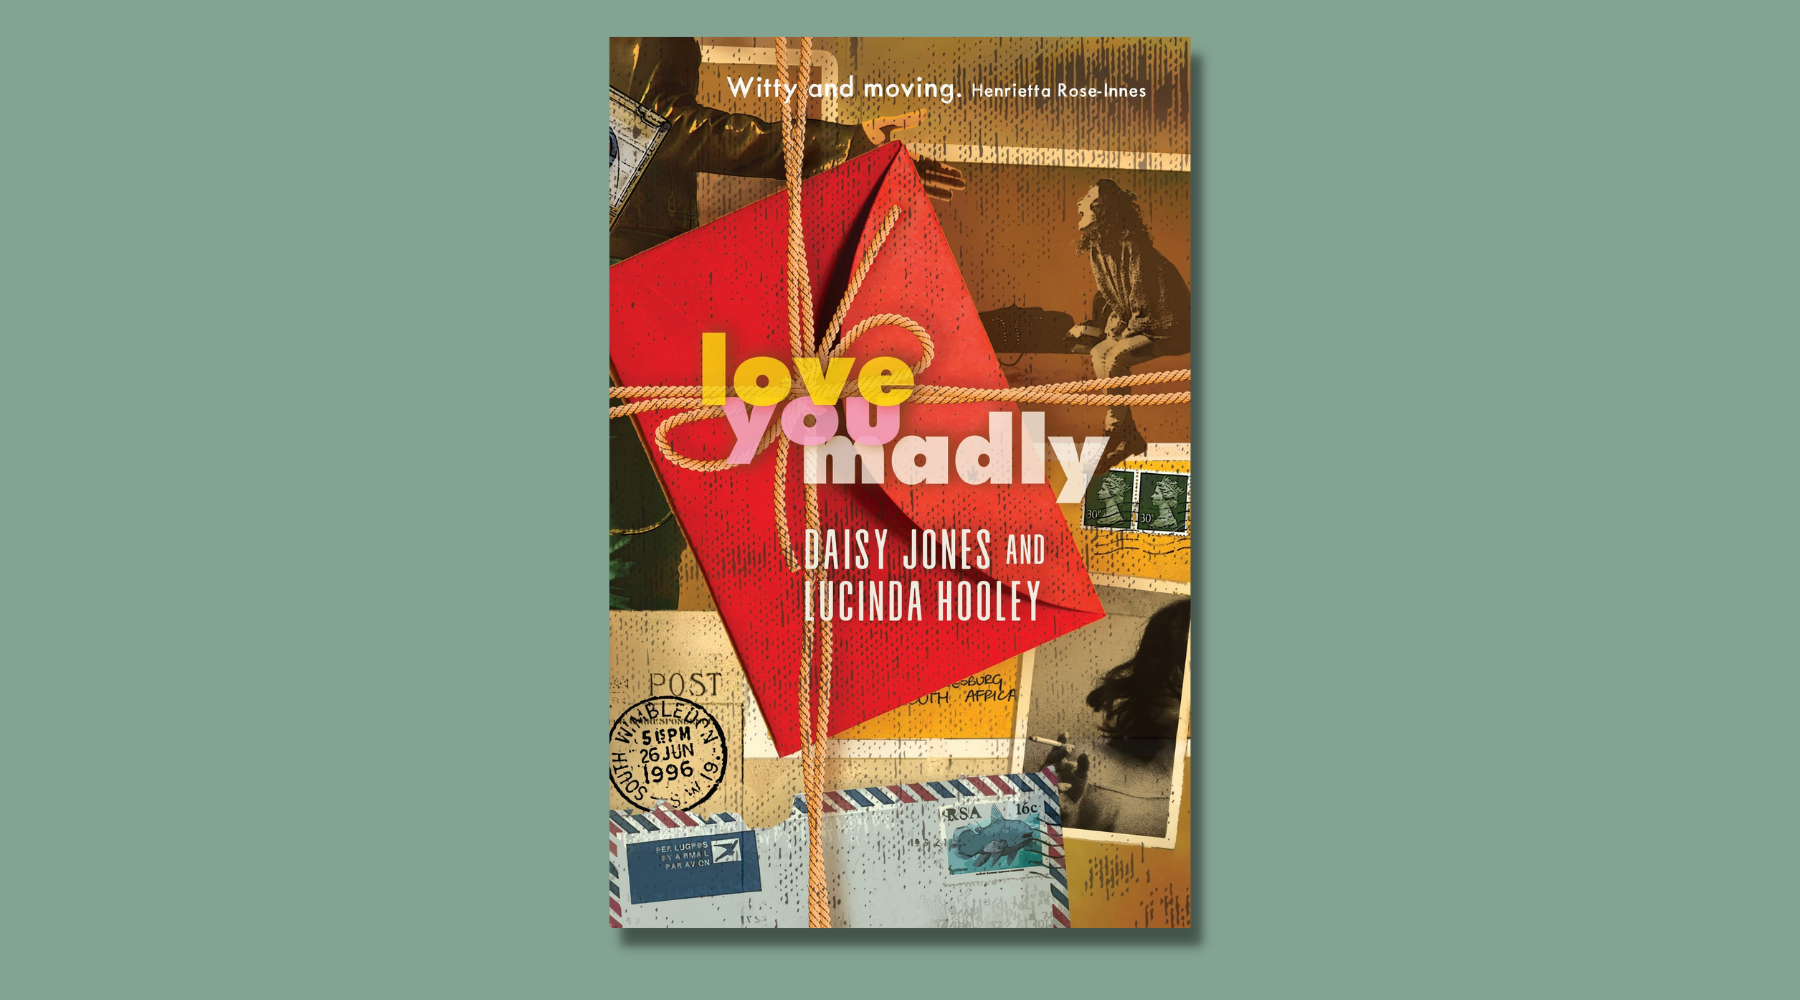 Love You Madly by Lucinda Hooley and Daisy Jones